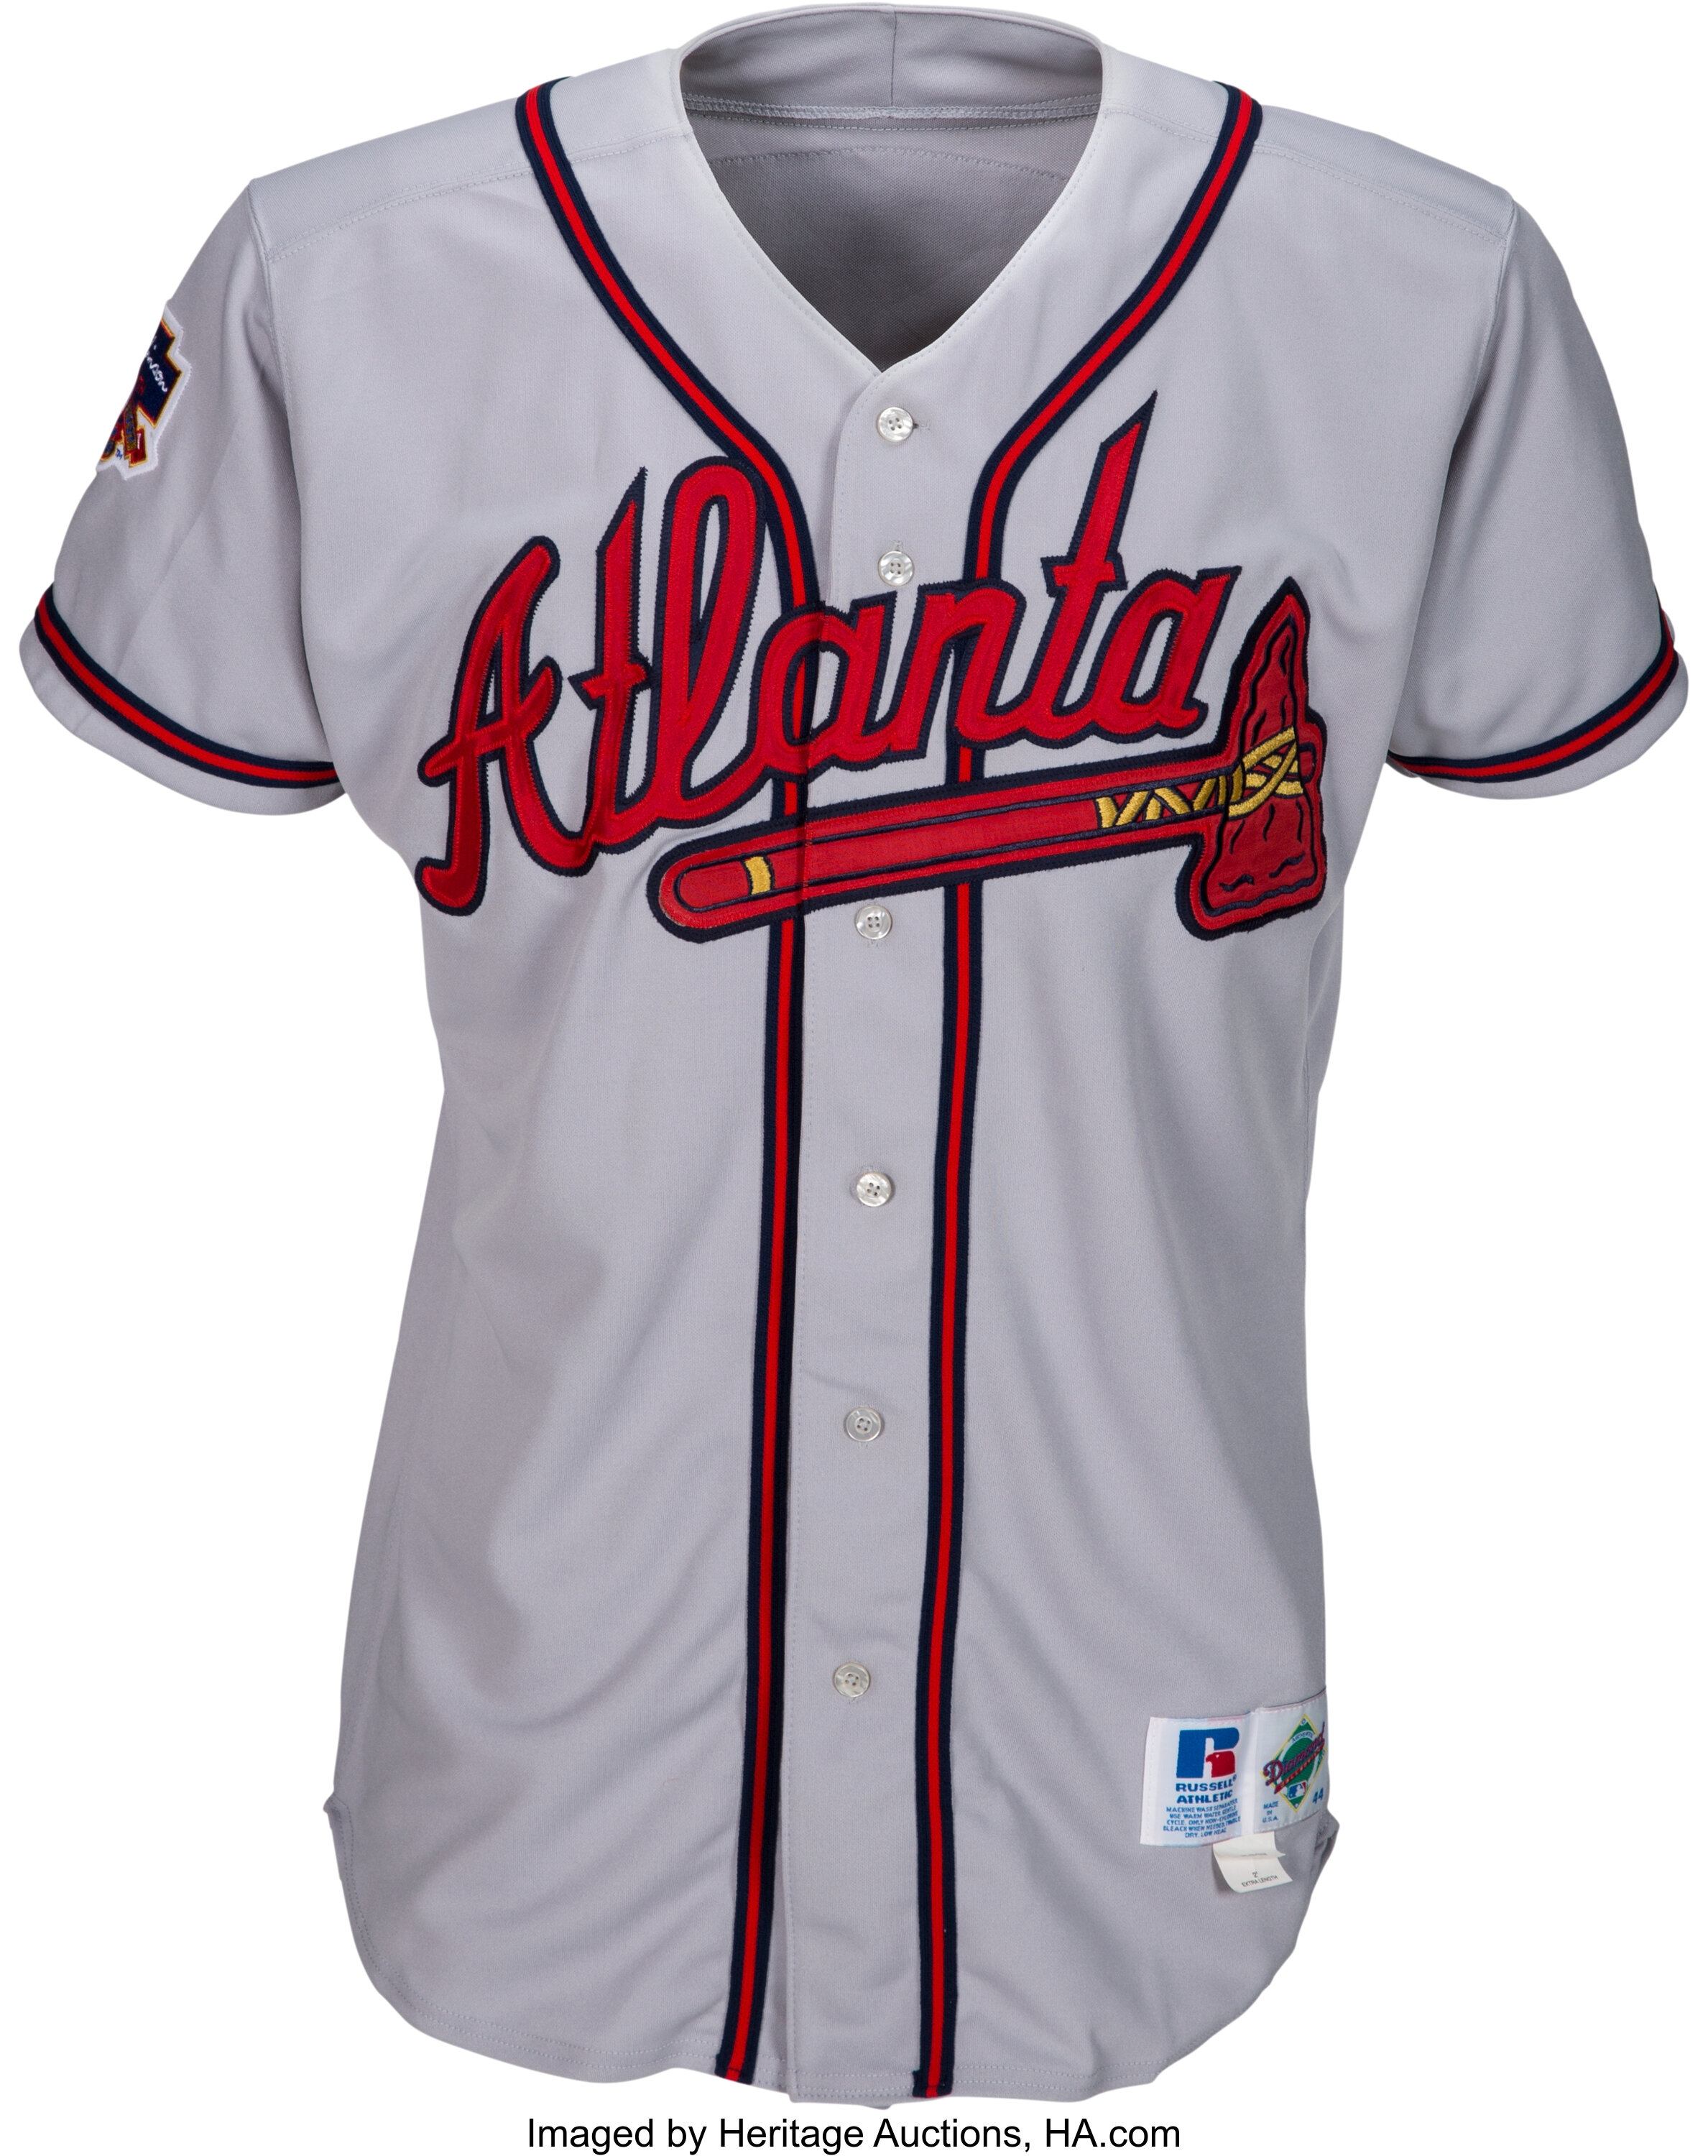 1997 Greg Maddux Game Worn & Signed Atlanta Braves Jersey with, Lot #50382